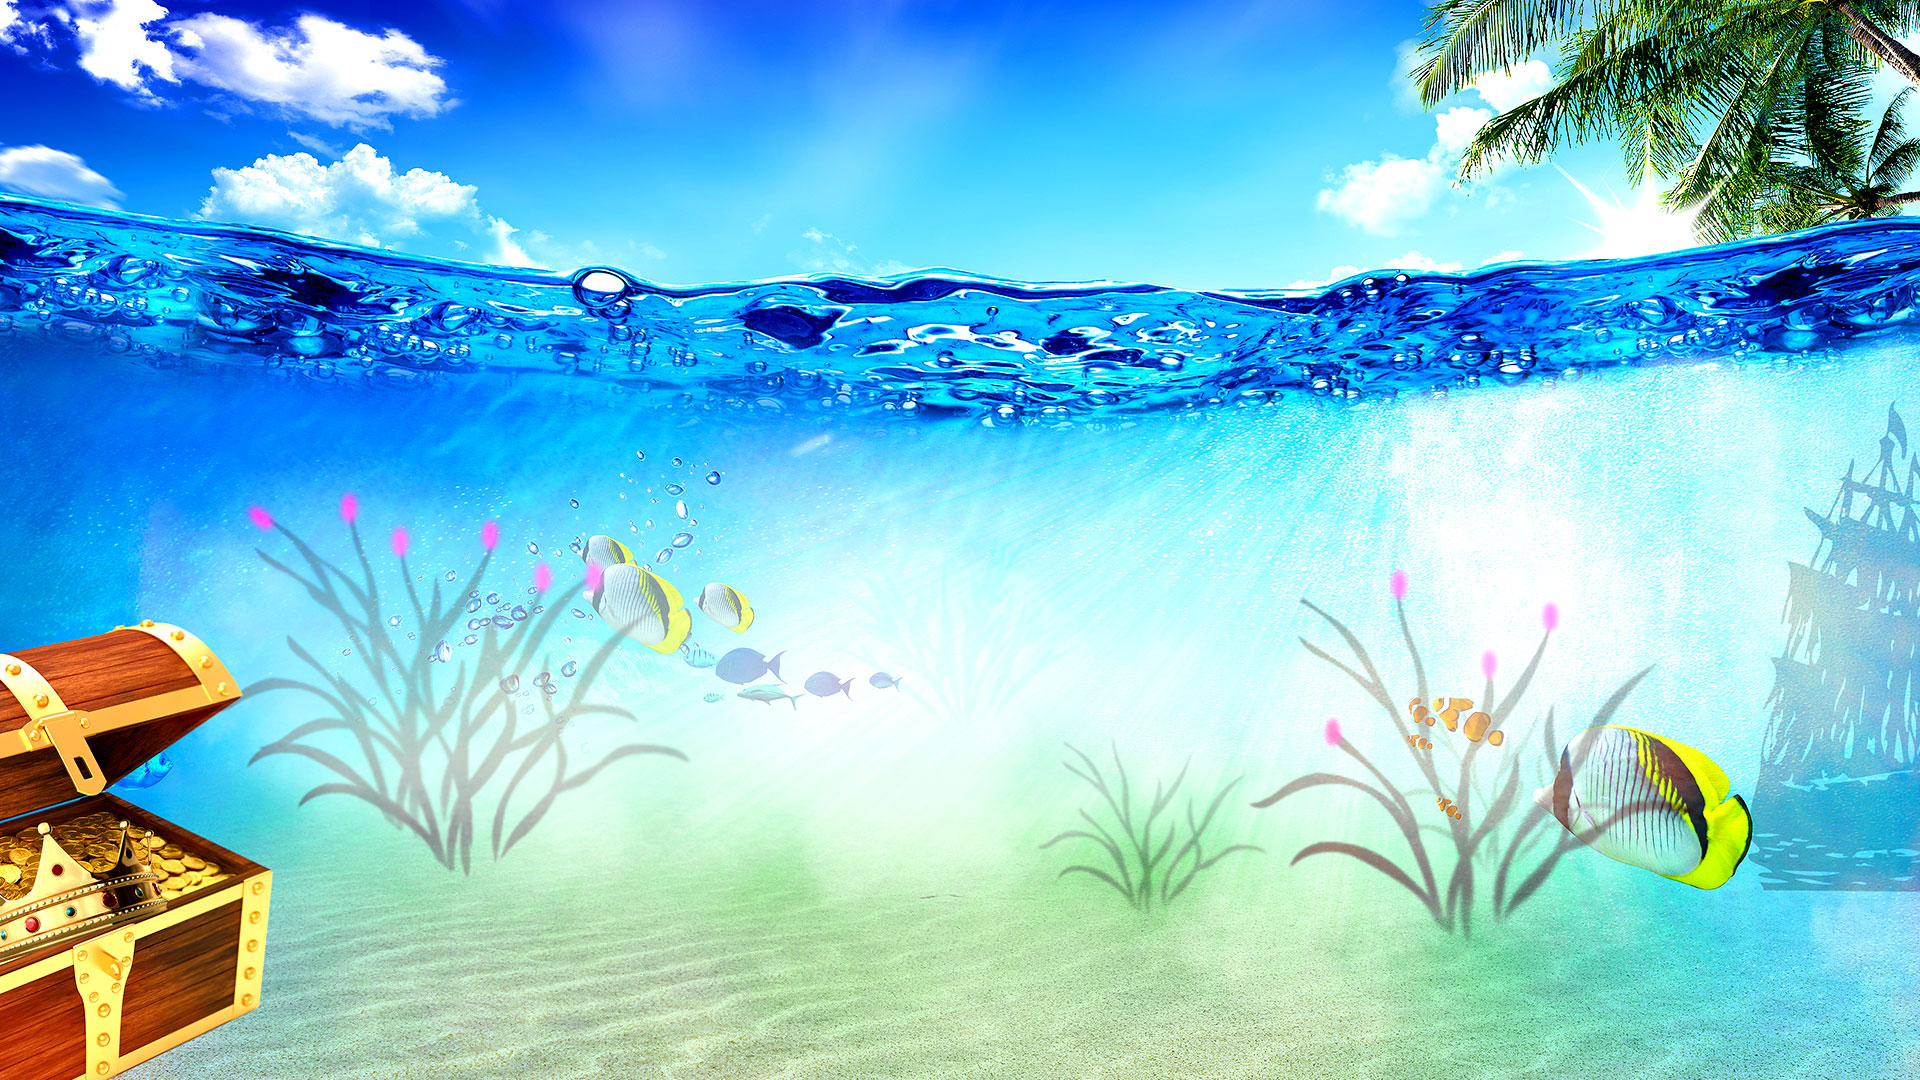 Game hight resolution background Pearls Fortune